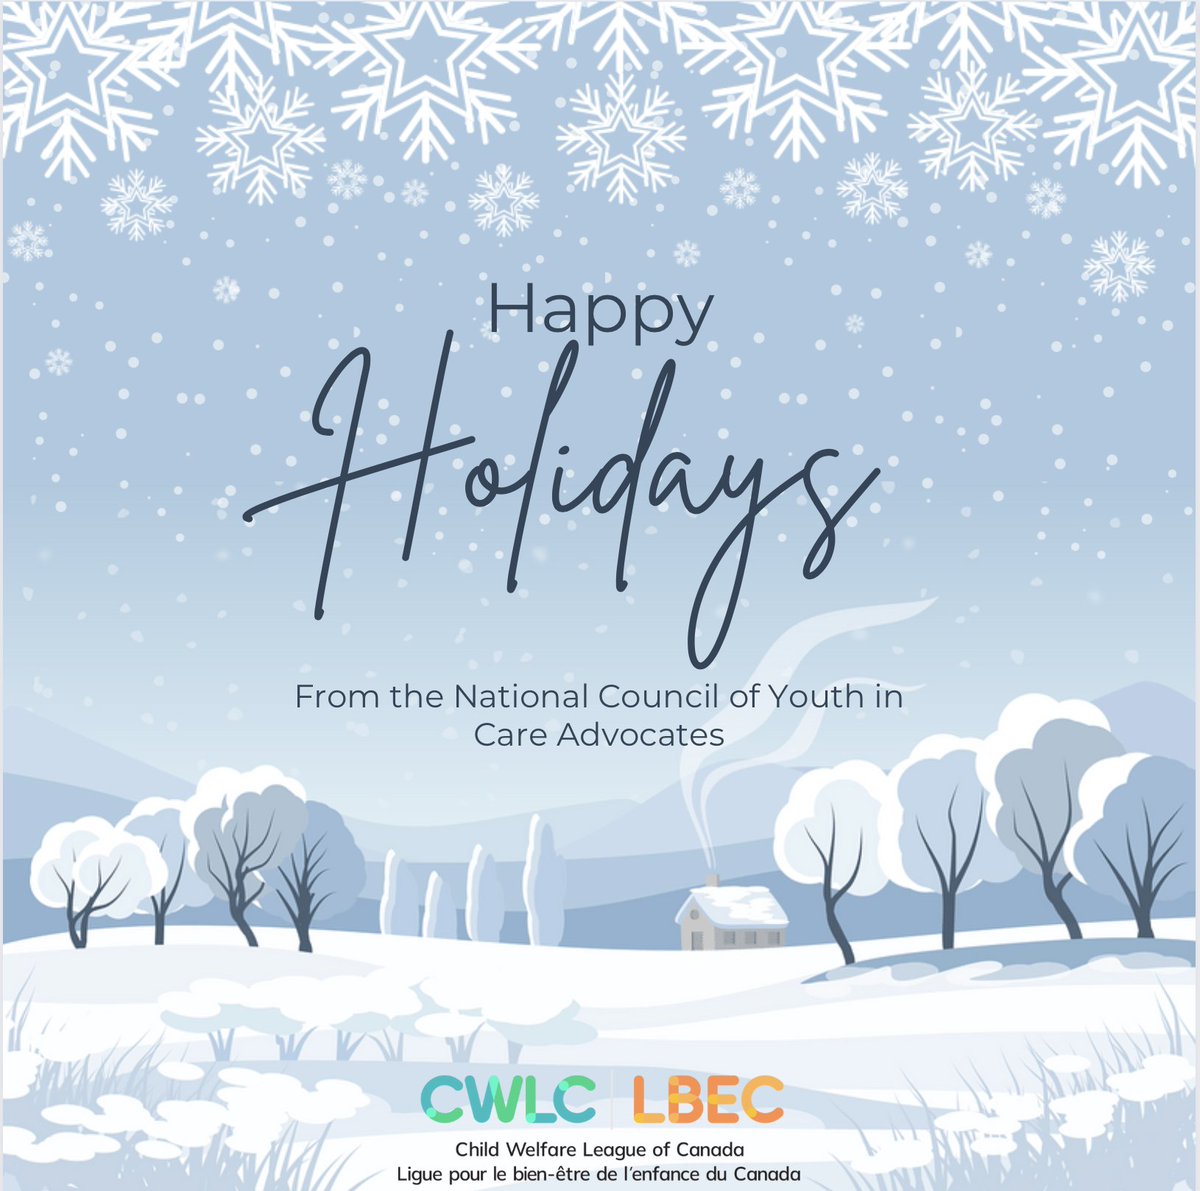 🎉 Happy Holidays from the National Council of Youth in Care Advocates! 🌟 We are taking a break until January when we’ll share some further news about the Equitable Transitions to Adulthood for Youth in Care Project! #Standwithyouthincare #childwelfare